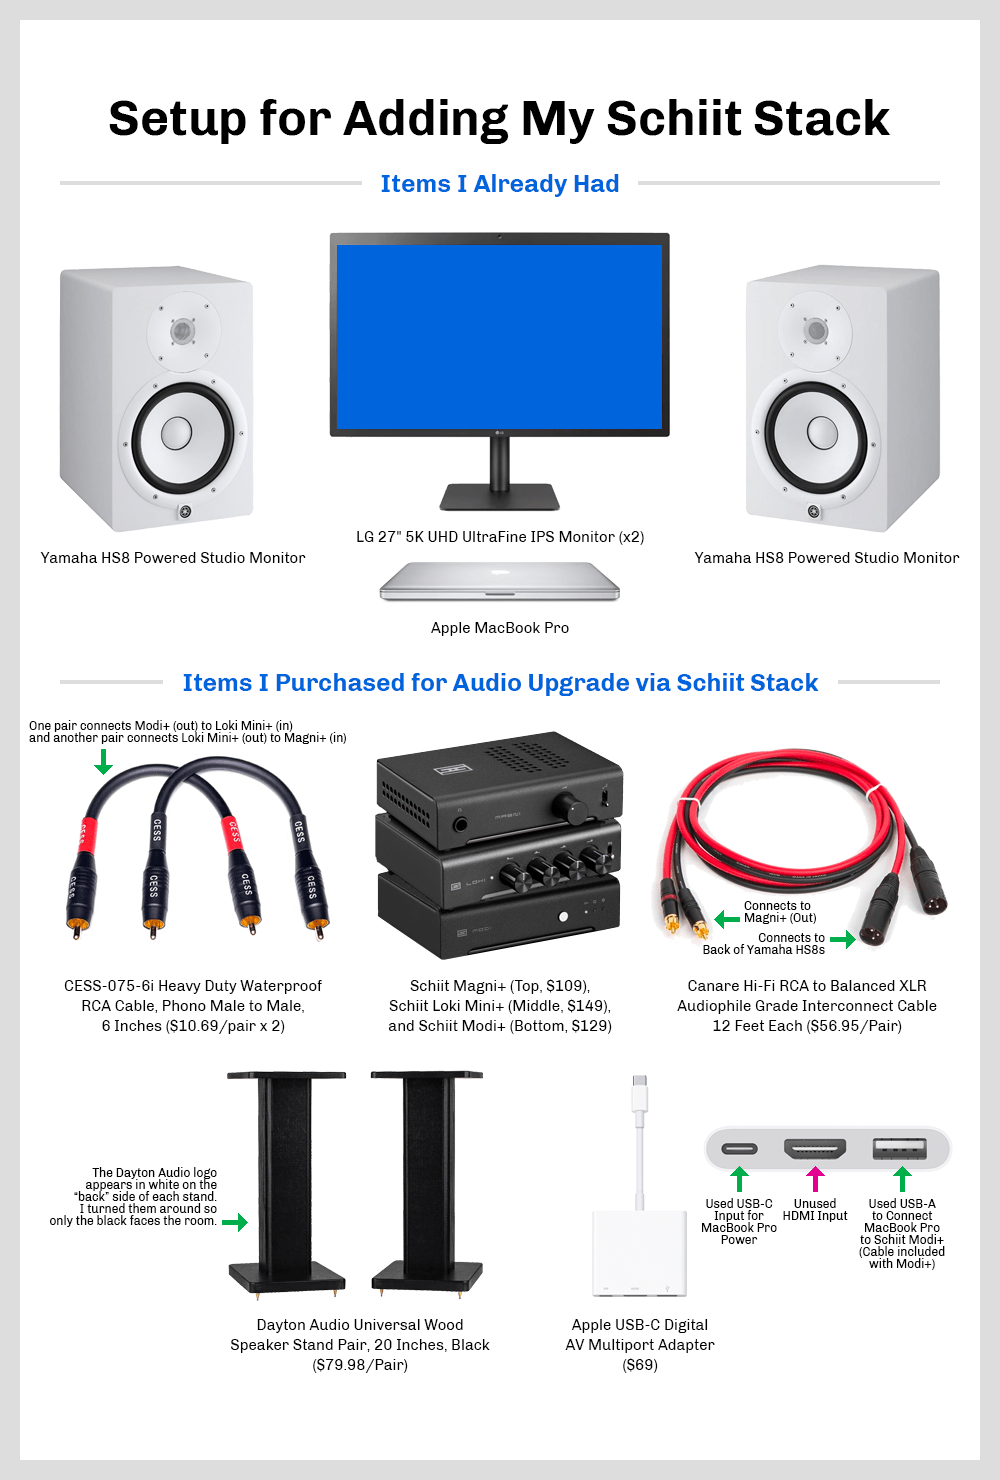 Products needed for my audio upgrade, including computer, monitor, speakers, Schiit audio components, stands, cables, etc.